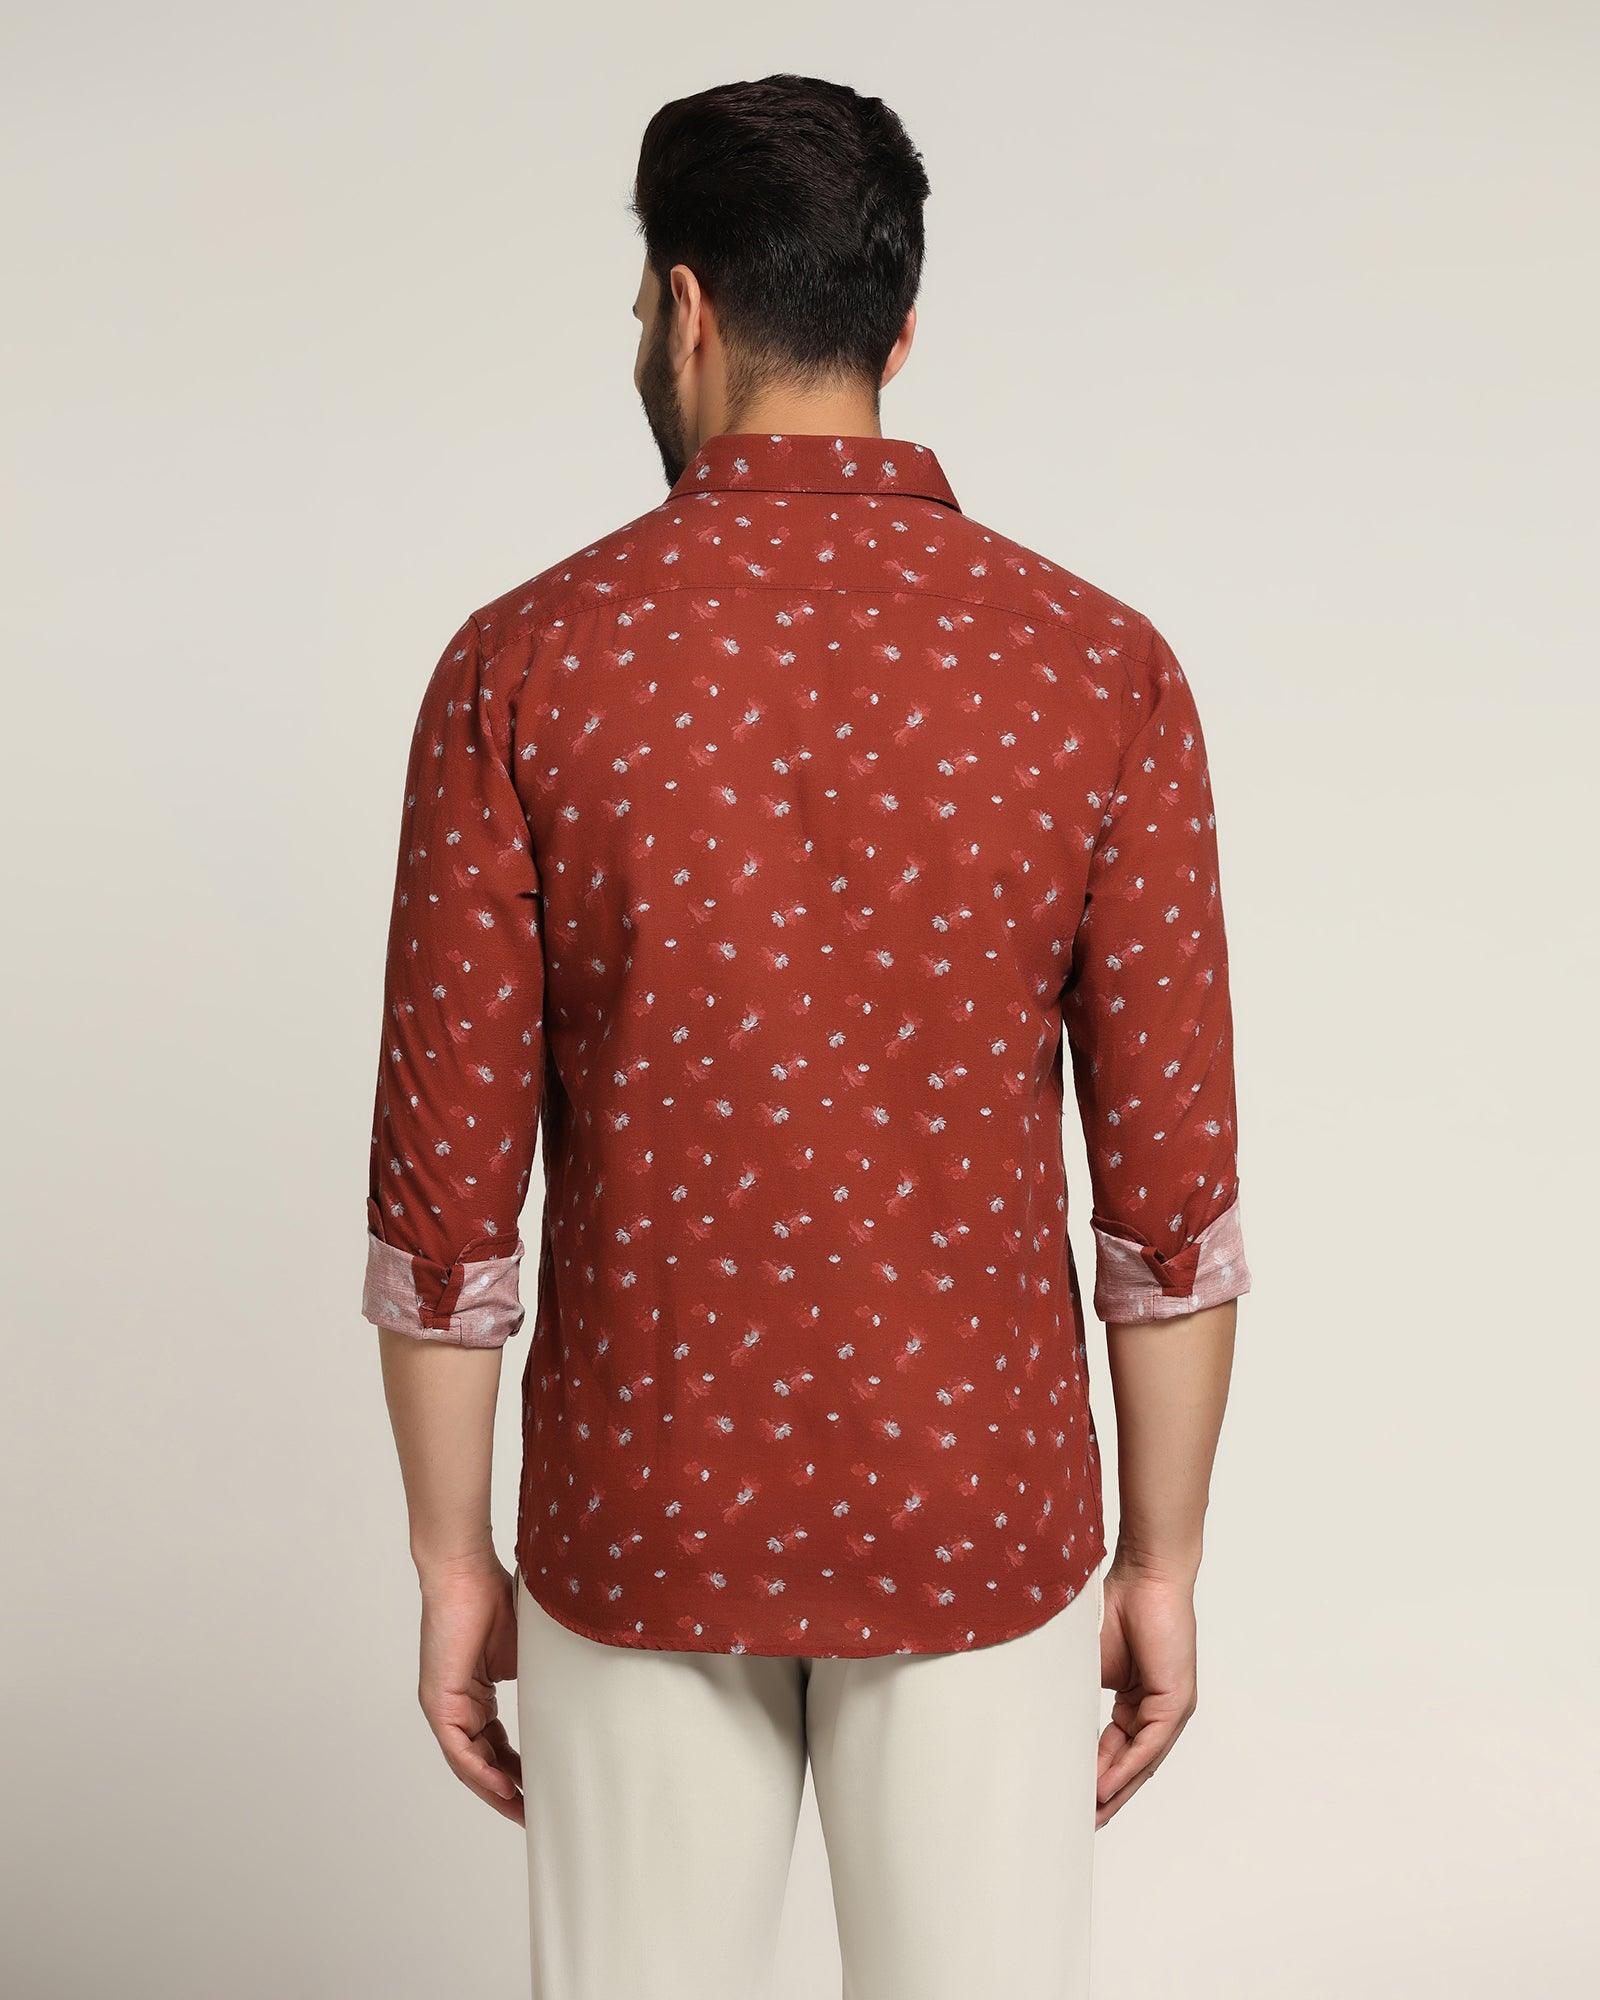 Linen Casual Rust Printed Shirt - Andre